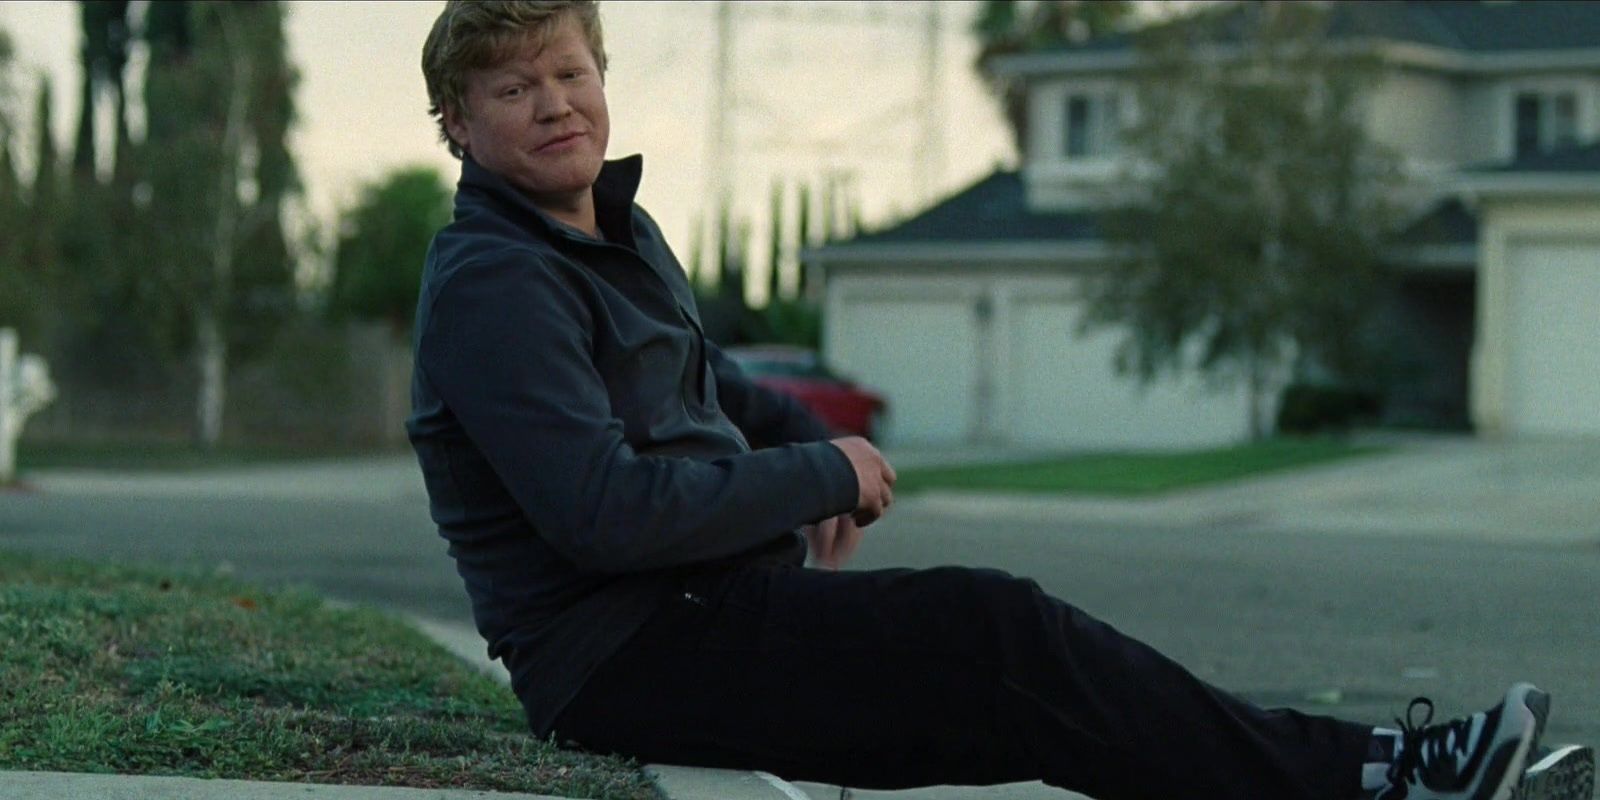 Jesse Plemons’ 10 Best Films, Ranked According To Rotten Tomatoes